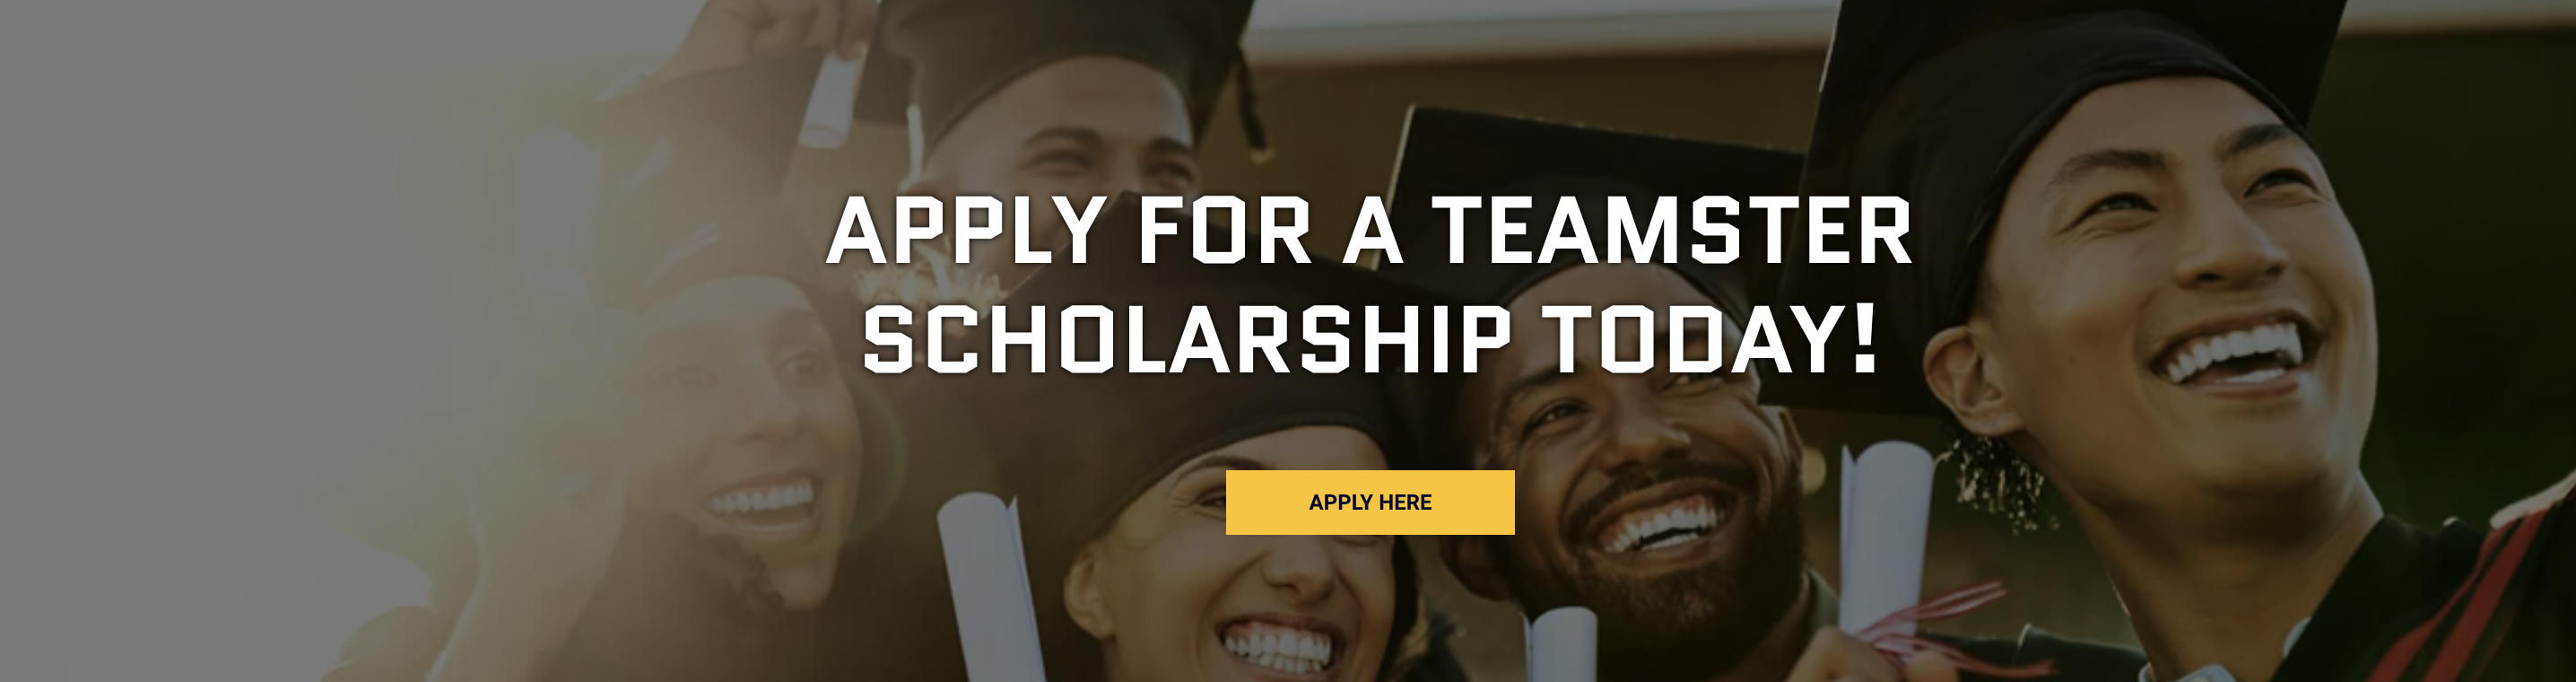 SCHOLARSHIP OPPORTUNITIES Teamsters Local 399 Hollywood